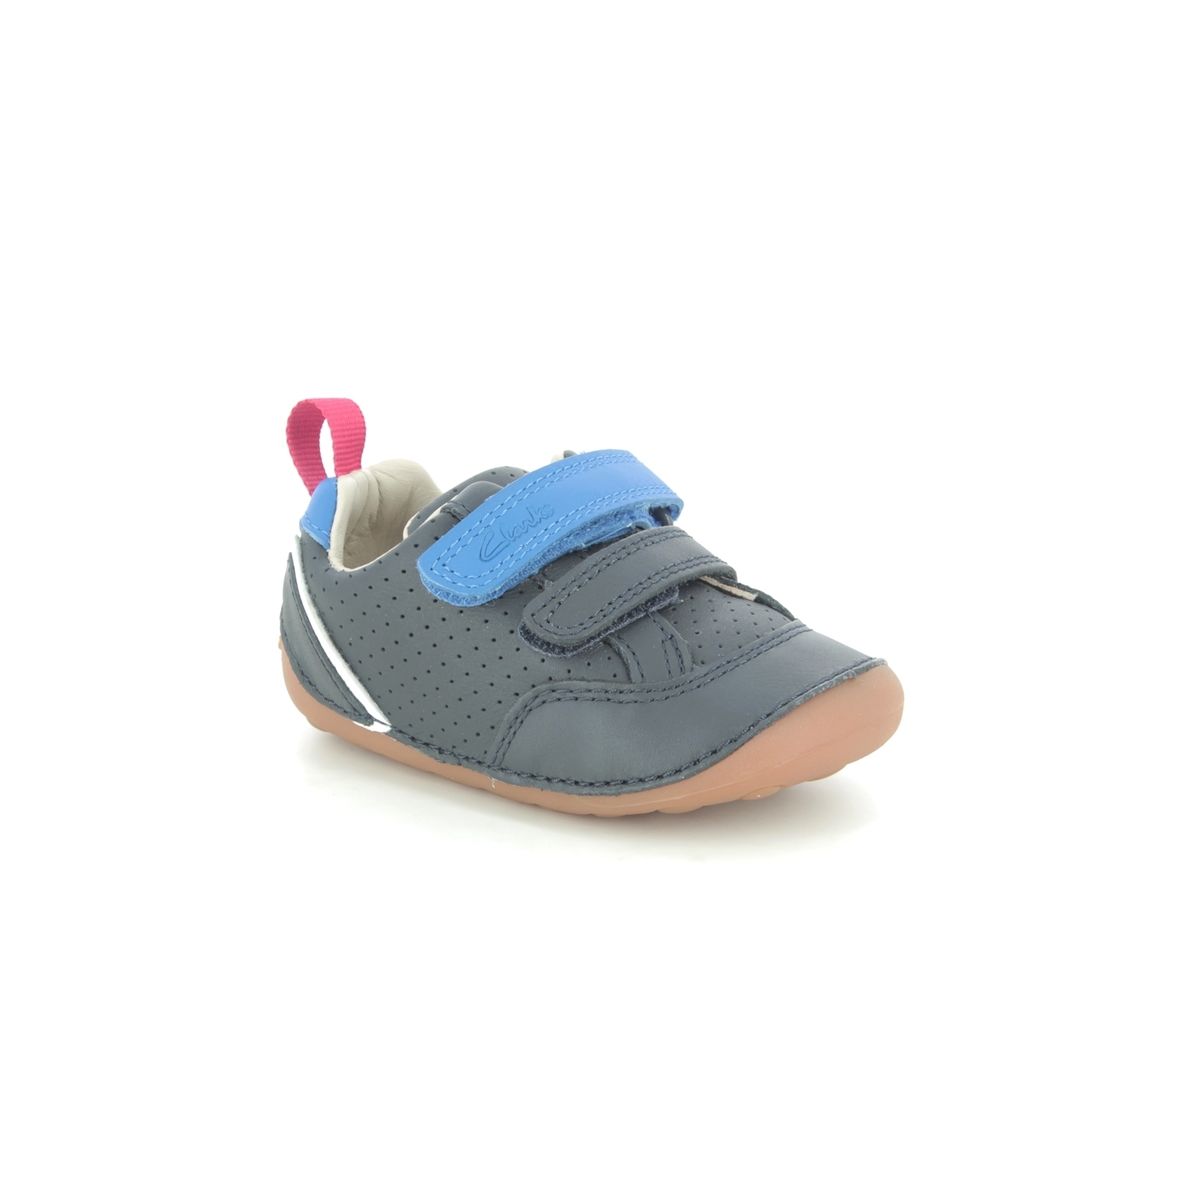 Clarks Tiny Sky T Navy Leather Kids Boys First And Toddler 576296F In Size 2.5 In Plain Navy Leather F Width Fitting Regular Fit For kids